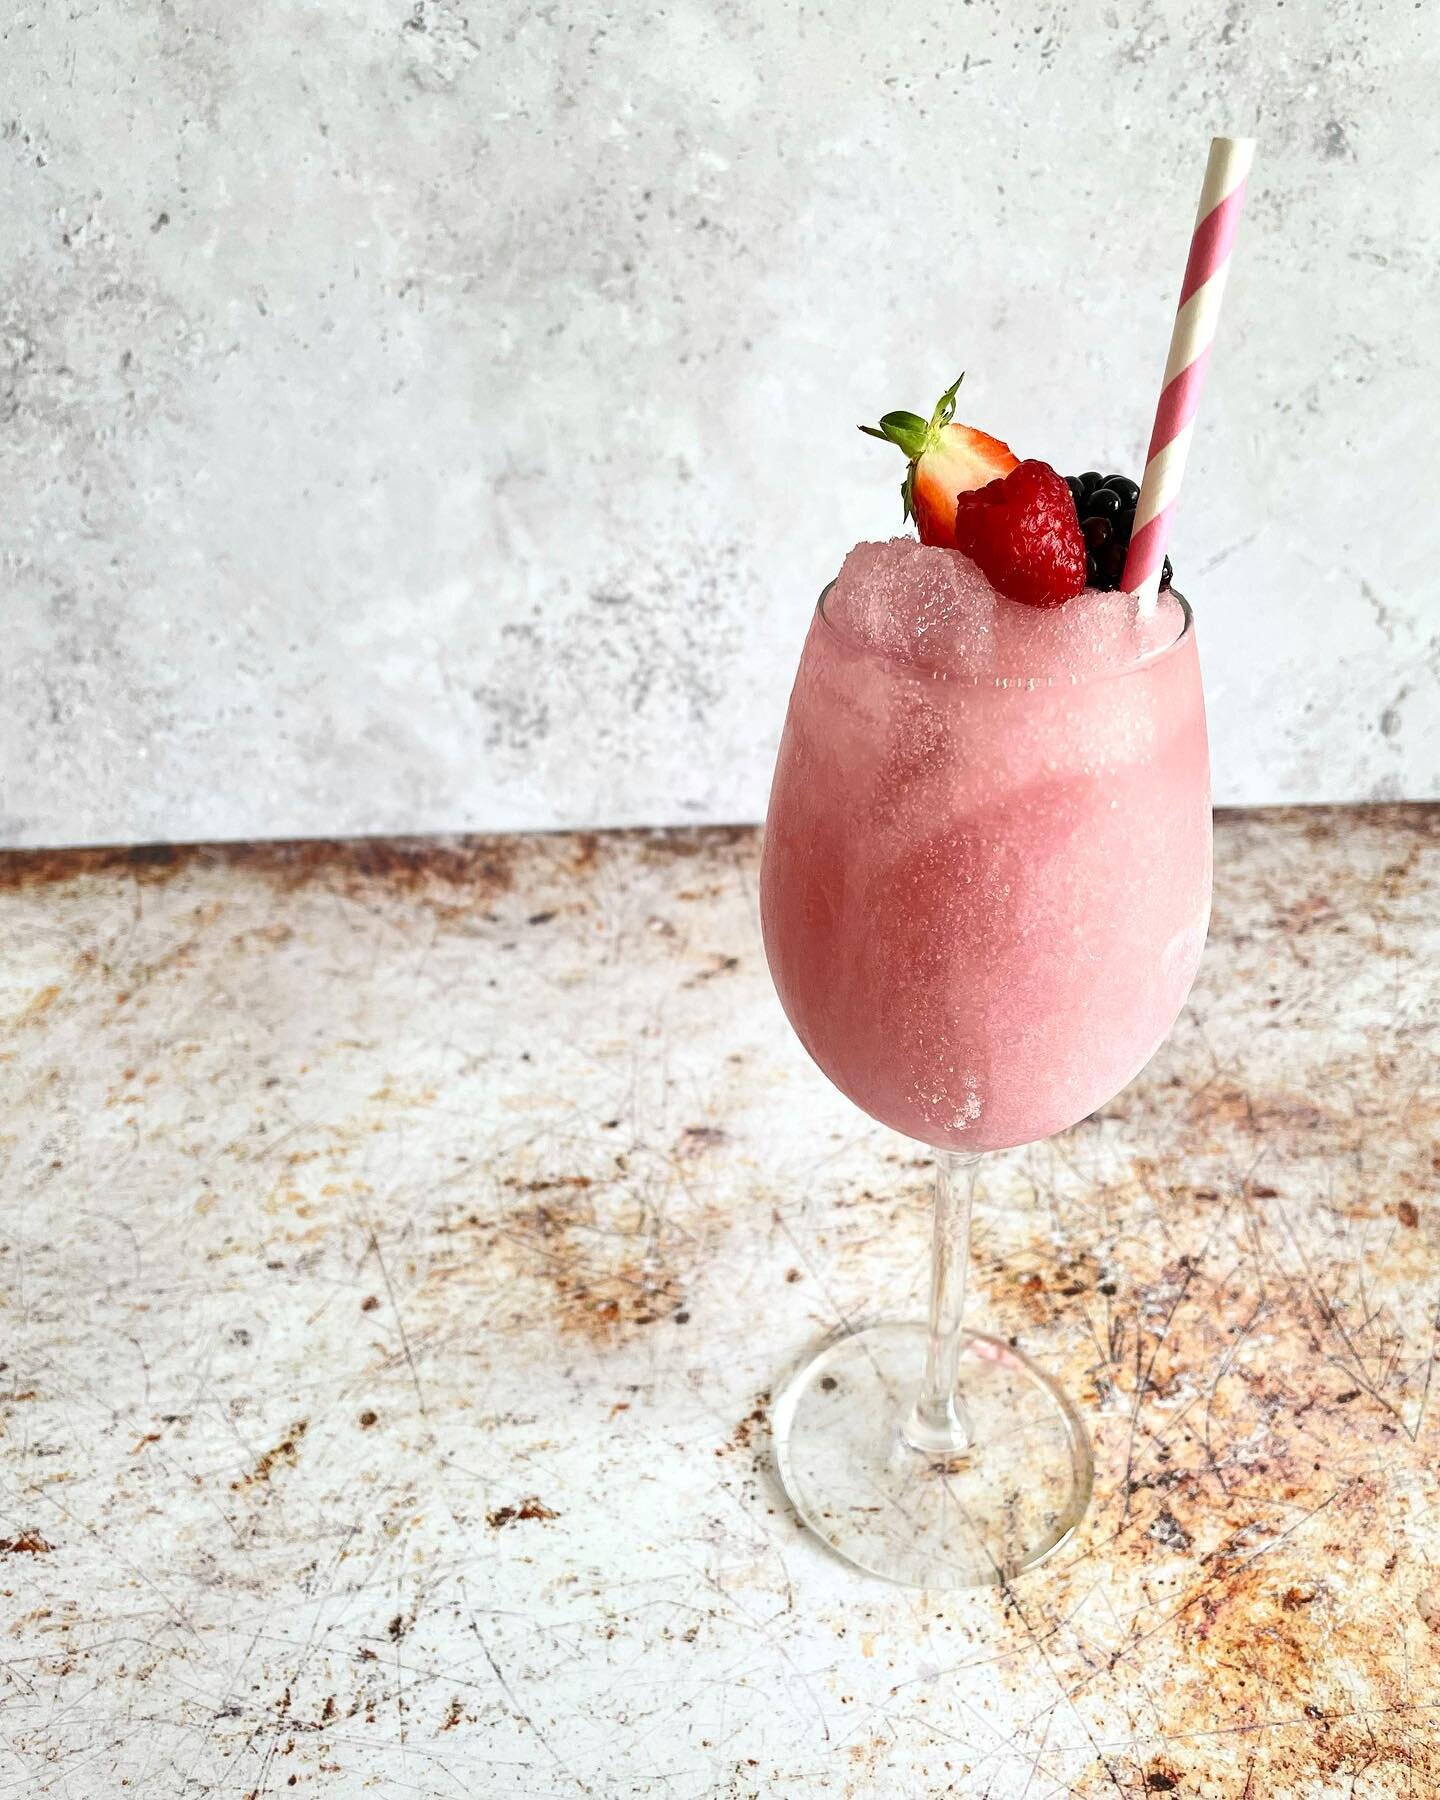 *new blog* top 5 ways to drink Esker Spirits this summer; including the ingredients and method for this Fros&eacute; made with Esker Scottish Raspberry Vodka 🍓

Find the recipe and methods in the blog via the link in our bio ⬆️ #EskerSpirits #Scotti